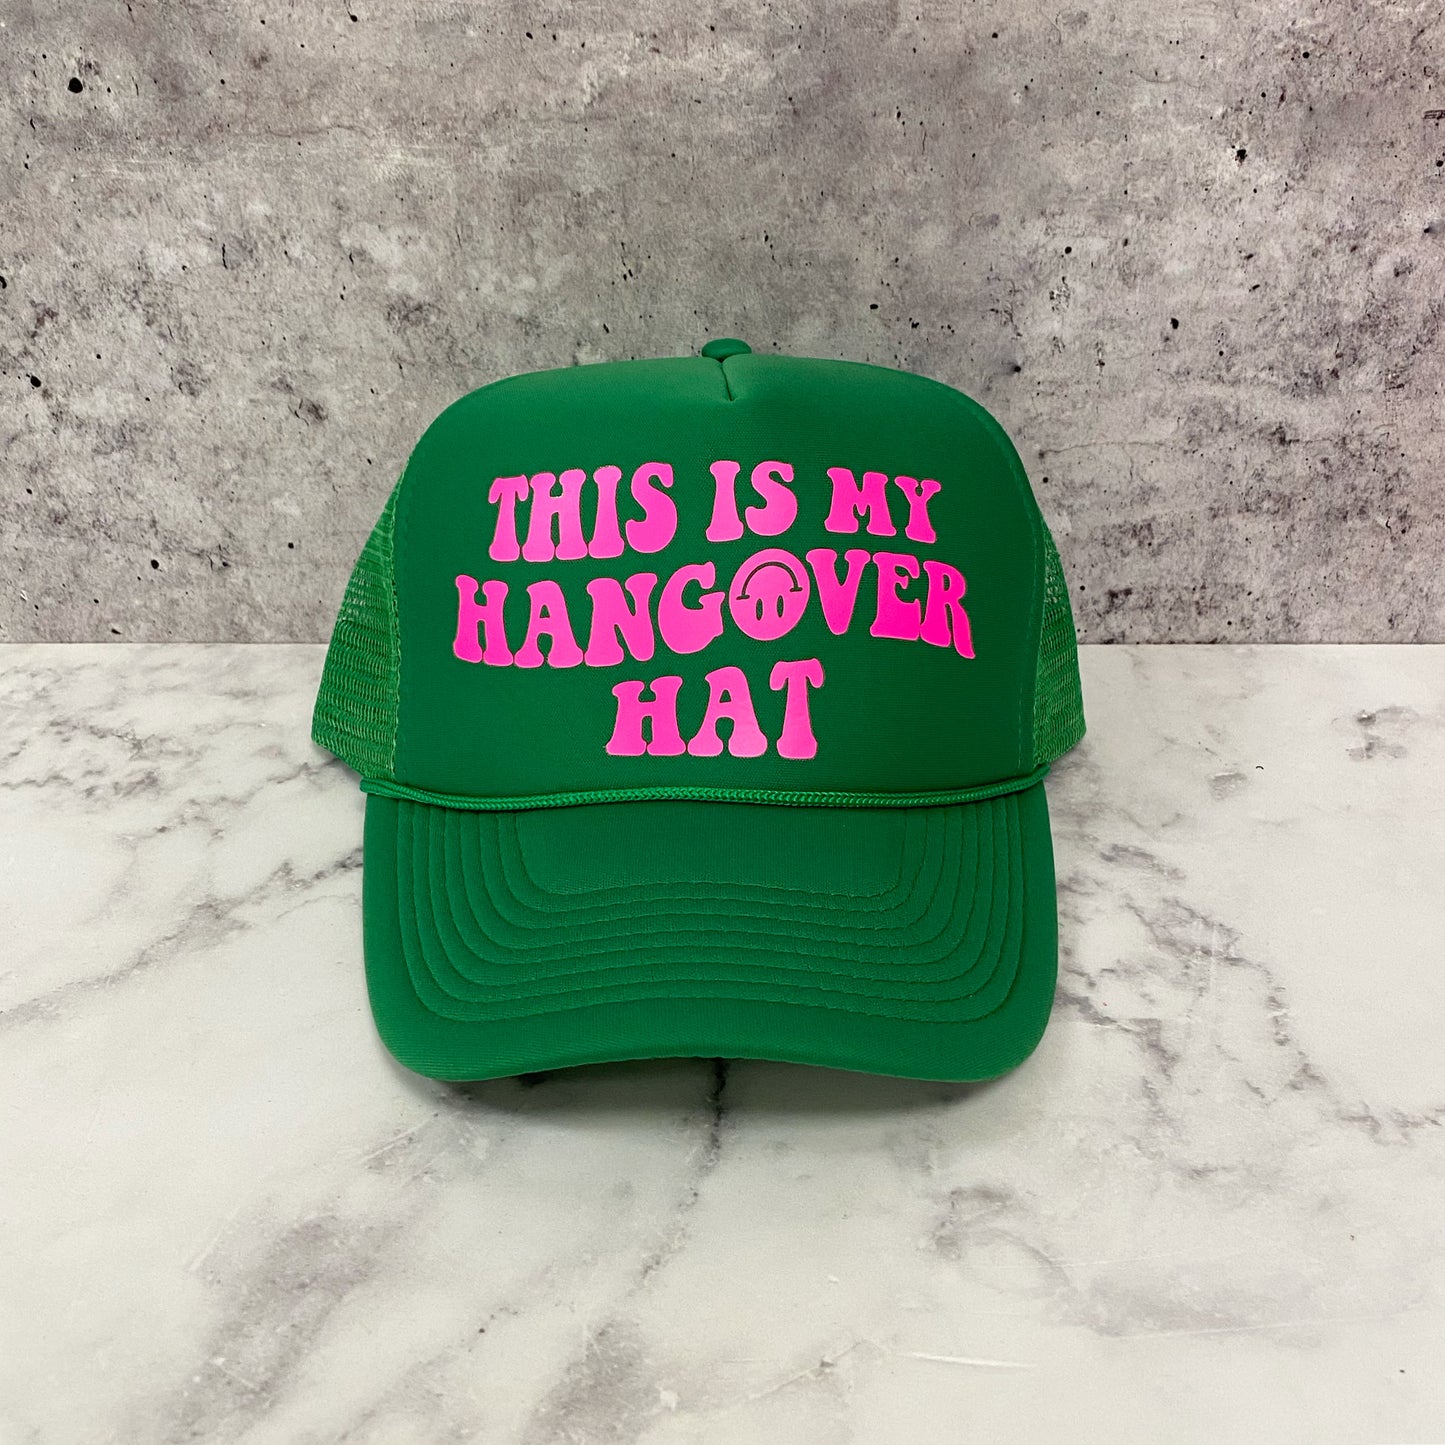 This is My Hangover Trucker Hat